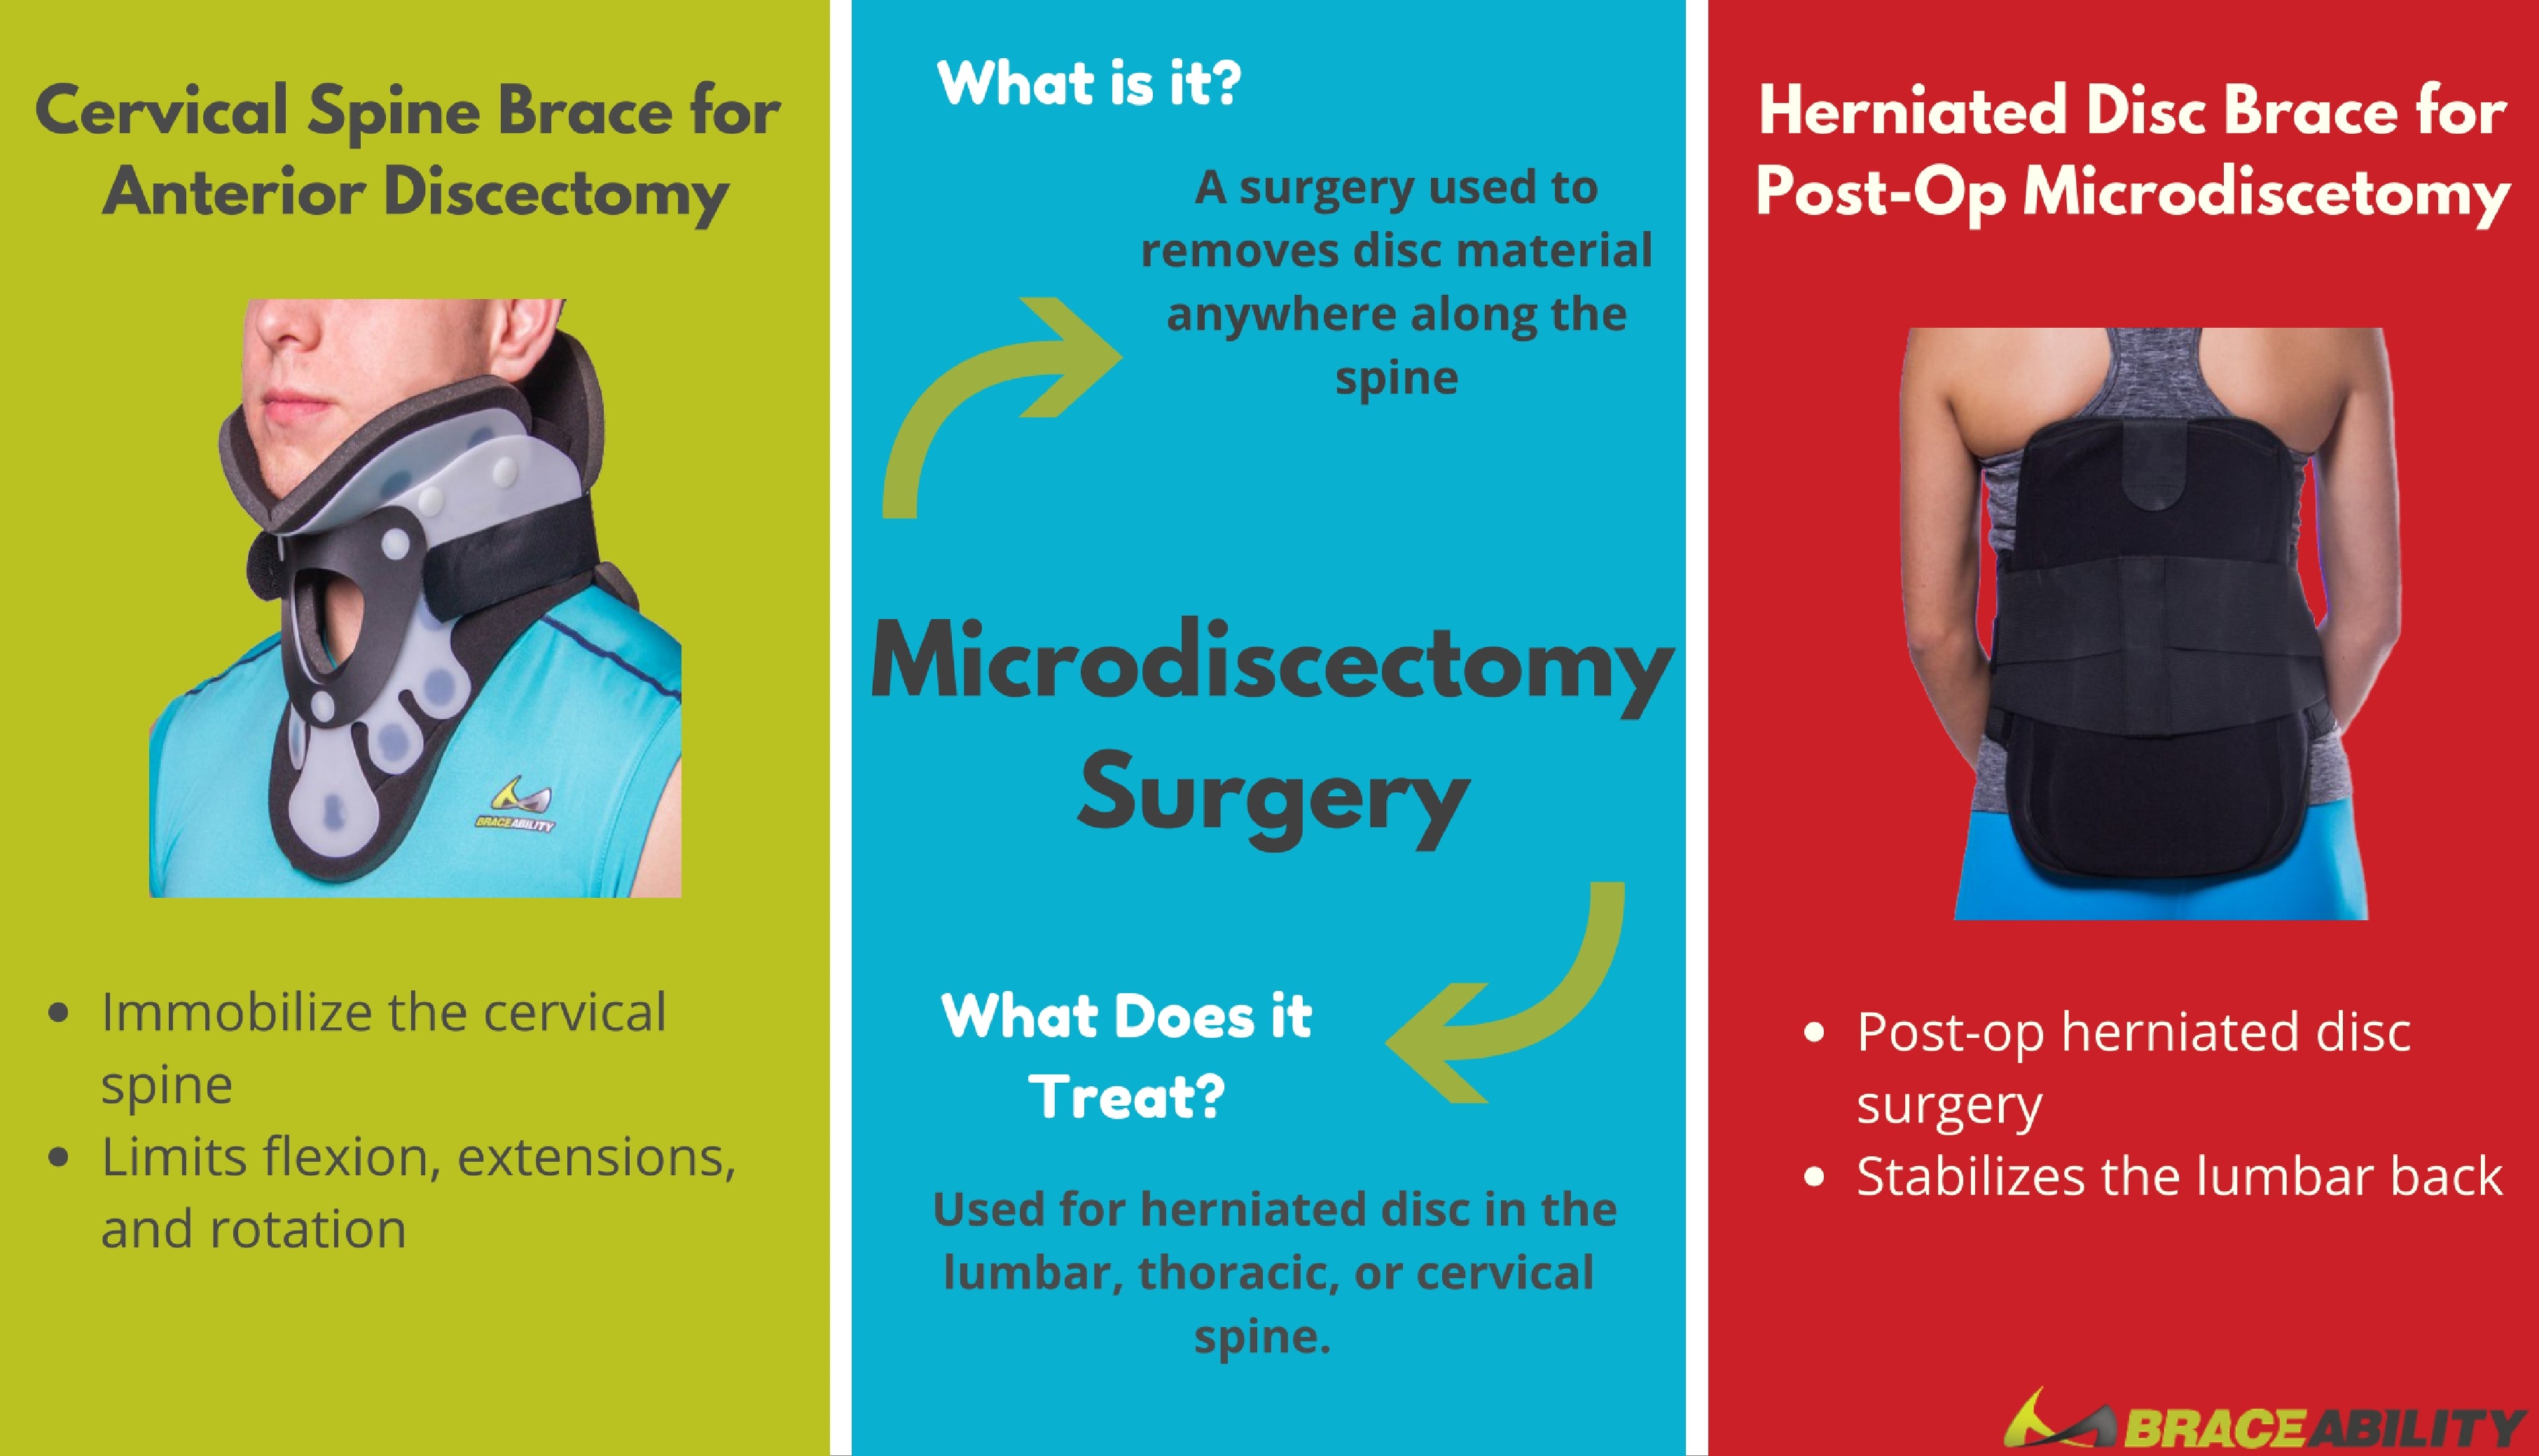 The best treatment braces for microdiscectomy surgery in your neck or back